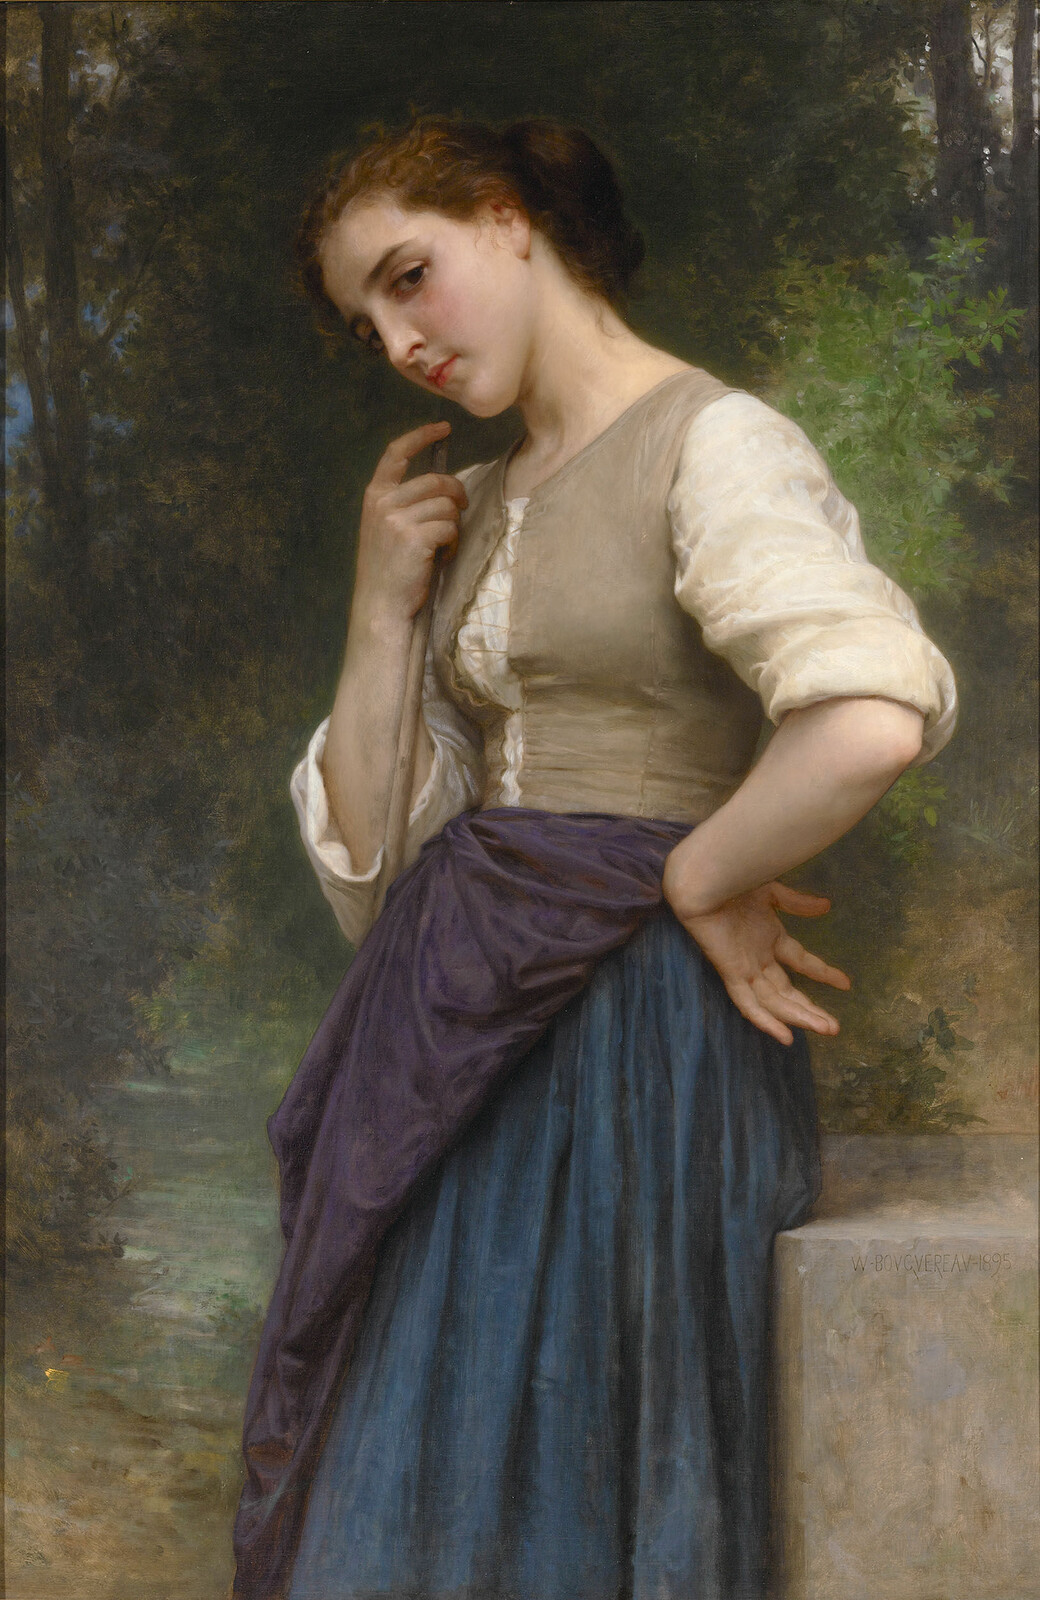 Reference - Original from W. A. Bouguereau